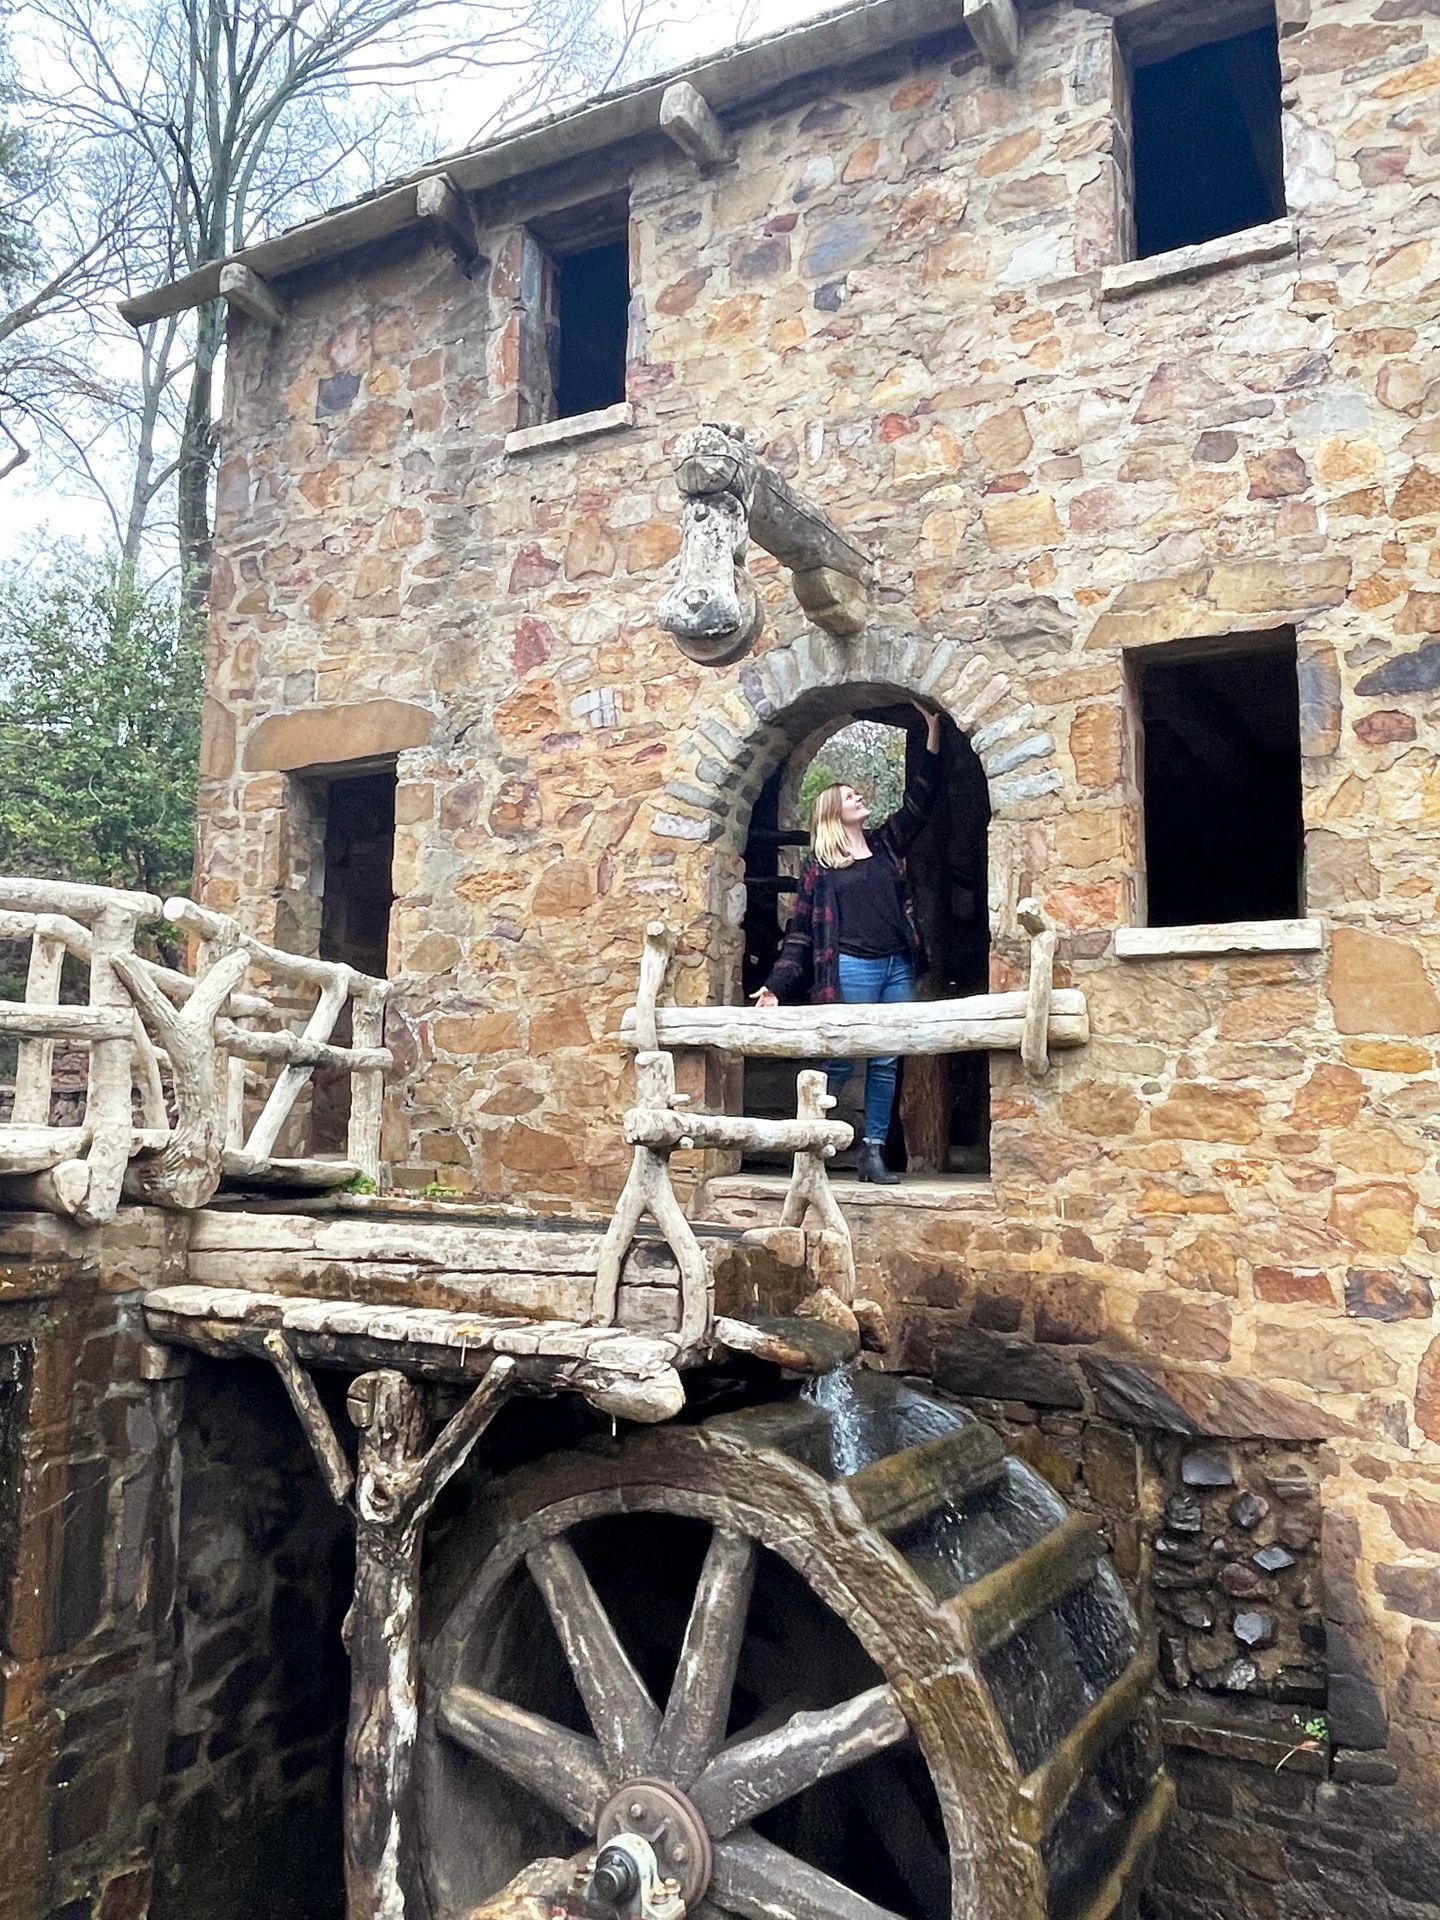 Lydia standing in the archway of the Old Mill. The building is made of tan stones and the water mill is below.